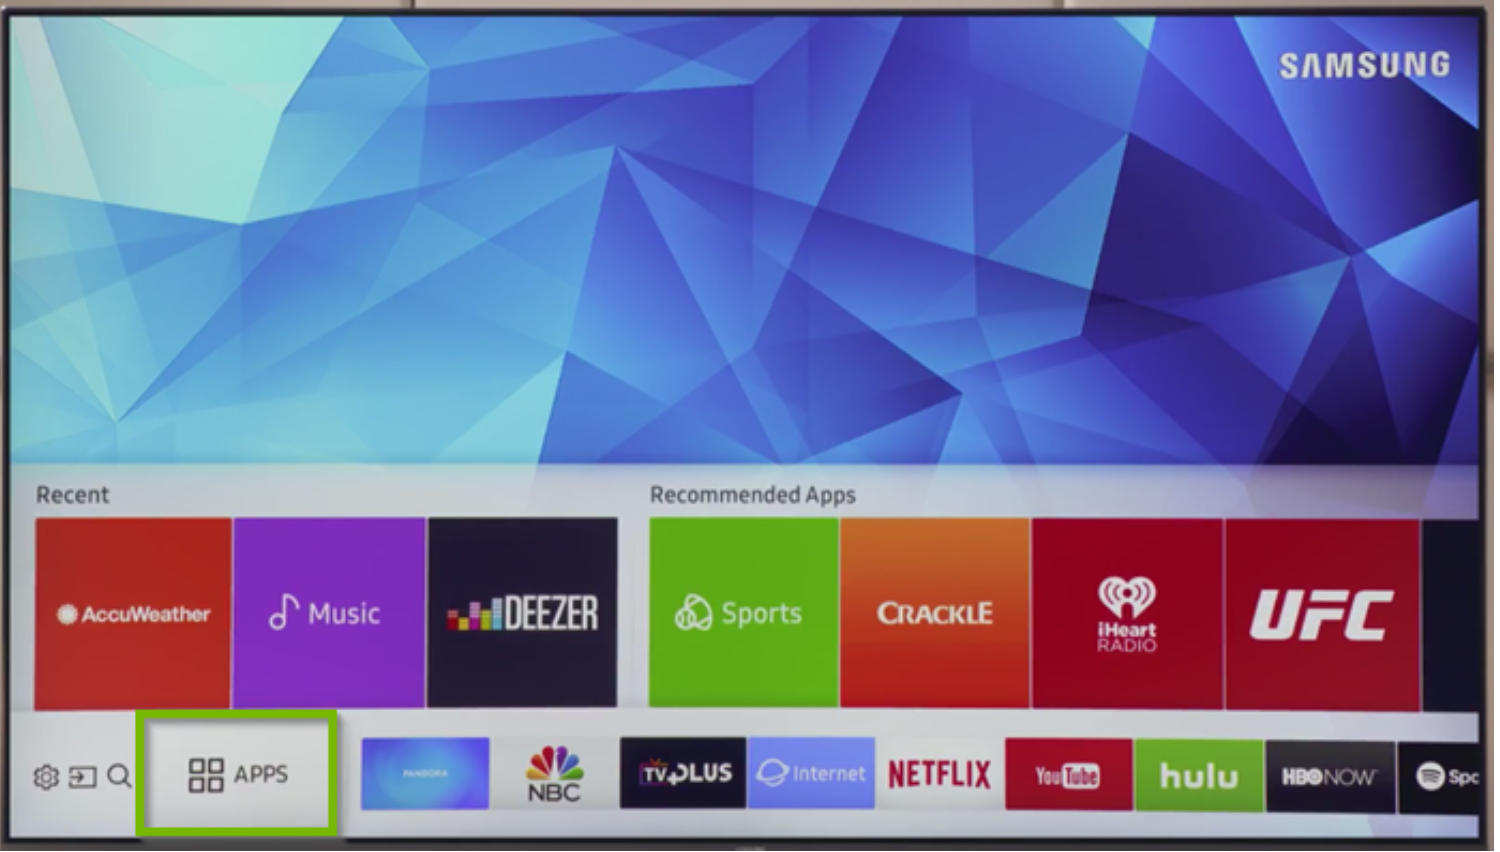 Samsung Apps On Samsung Smart TVs - How To Access and Use 